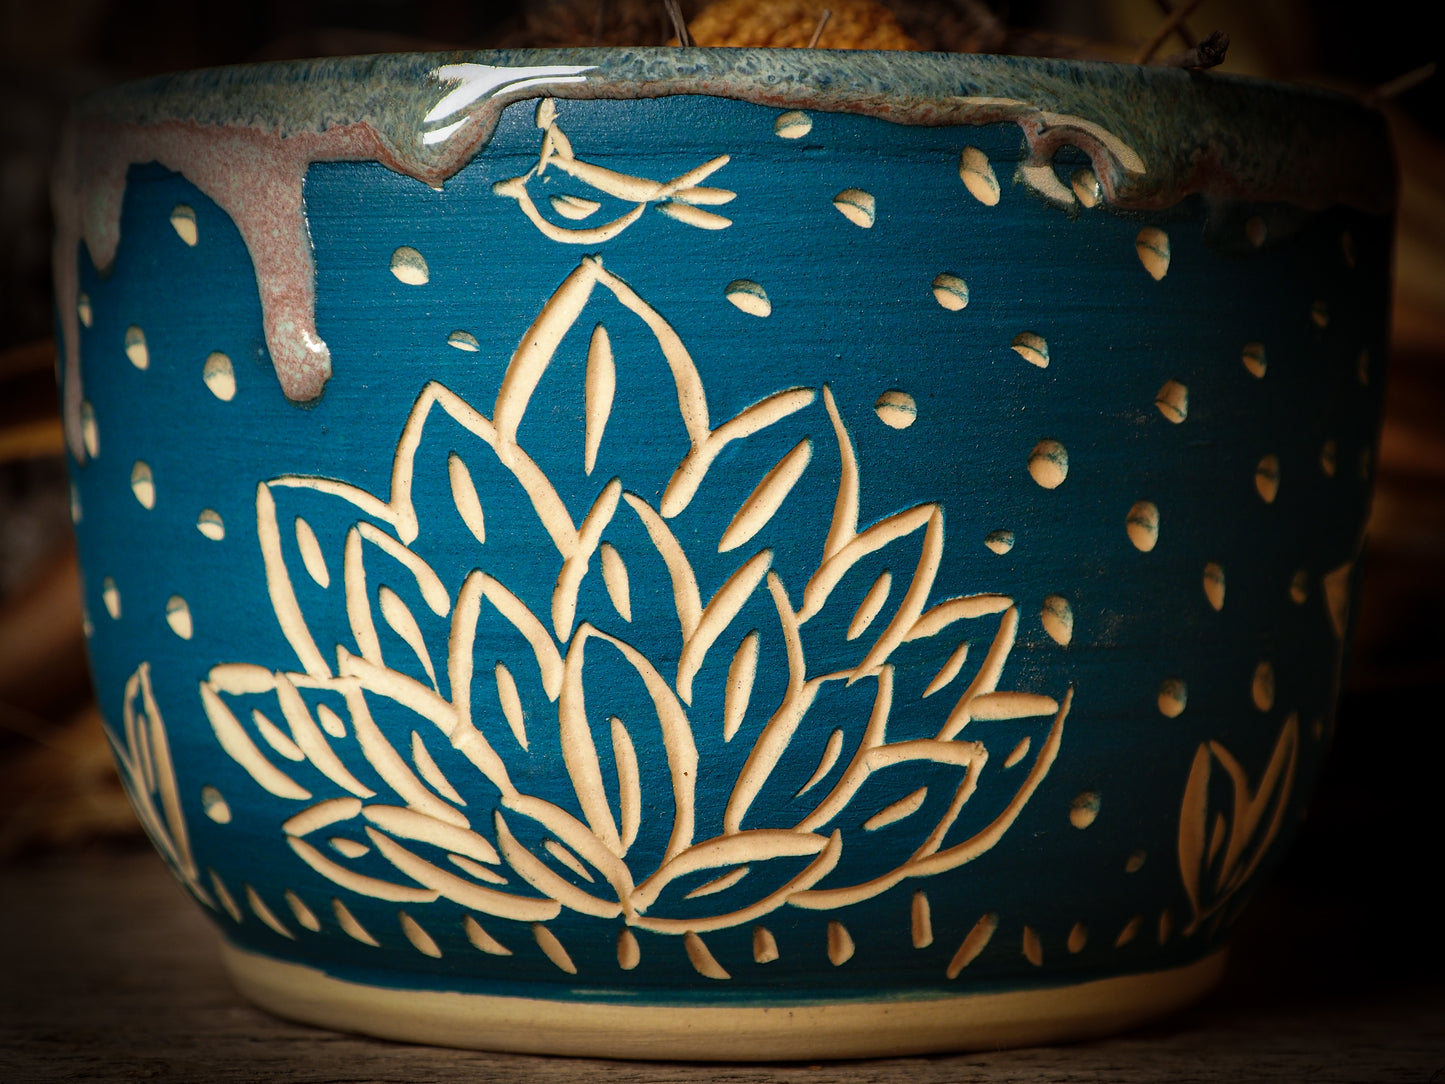 You are looking at original handmade fire glazed stoneware ceramic piece with sgraffito bird and peasant girl motifs in a deep aquamarine color by Idania Salcido, the artist behind Danita Art.  Each original Danita Art ceramics piece is unique and special and cannot be repeated. You are getting a one of a kind work of art to display, or use it as one of your favorite home decorations.